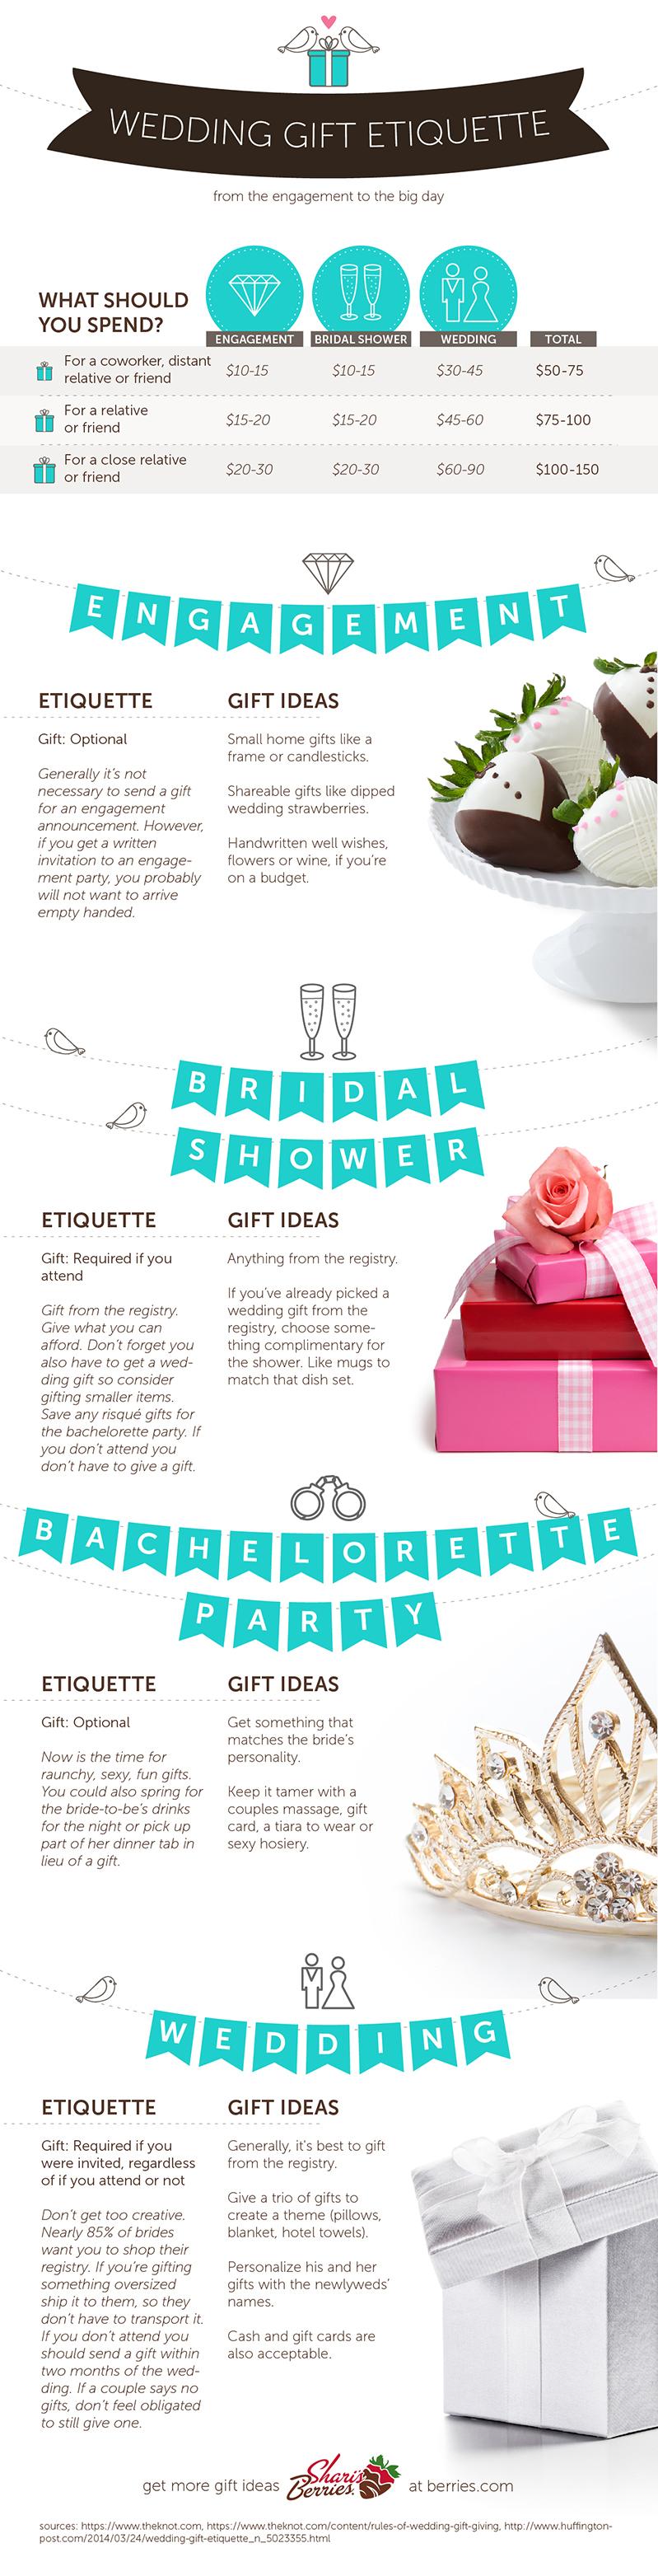 Wedding Gift Guide and Etiquette